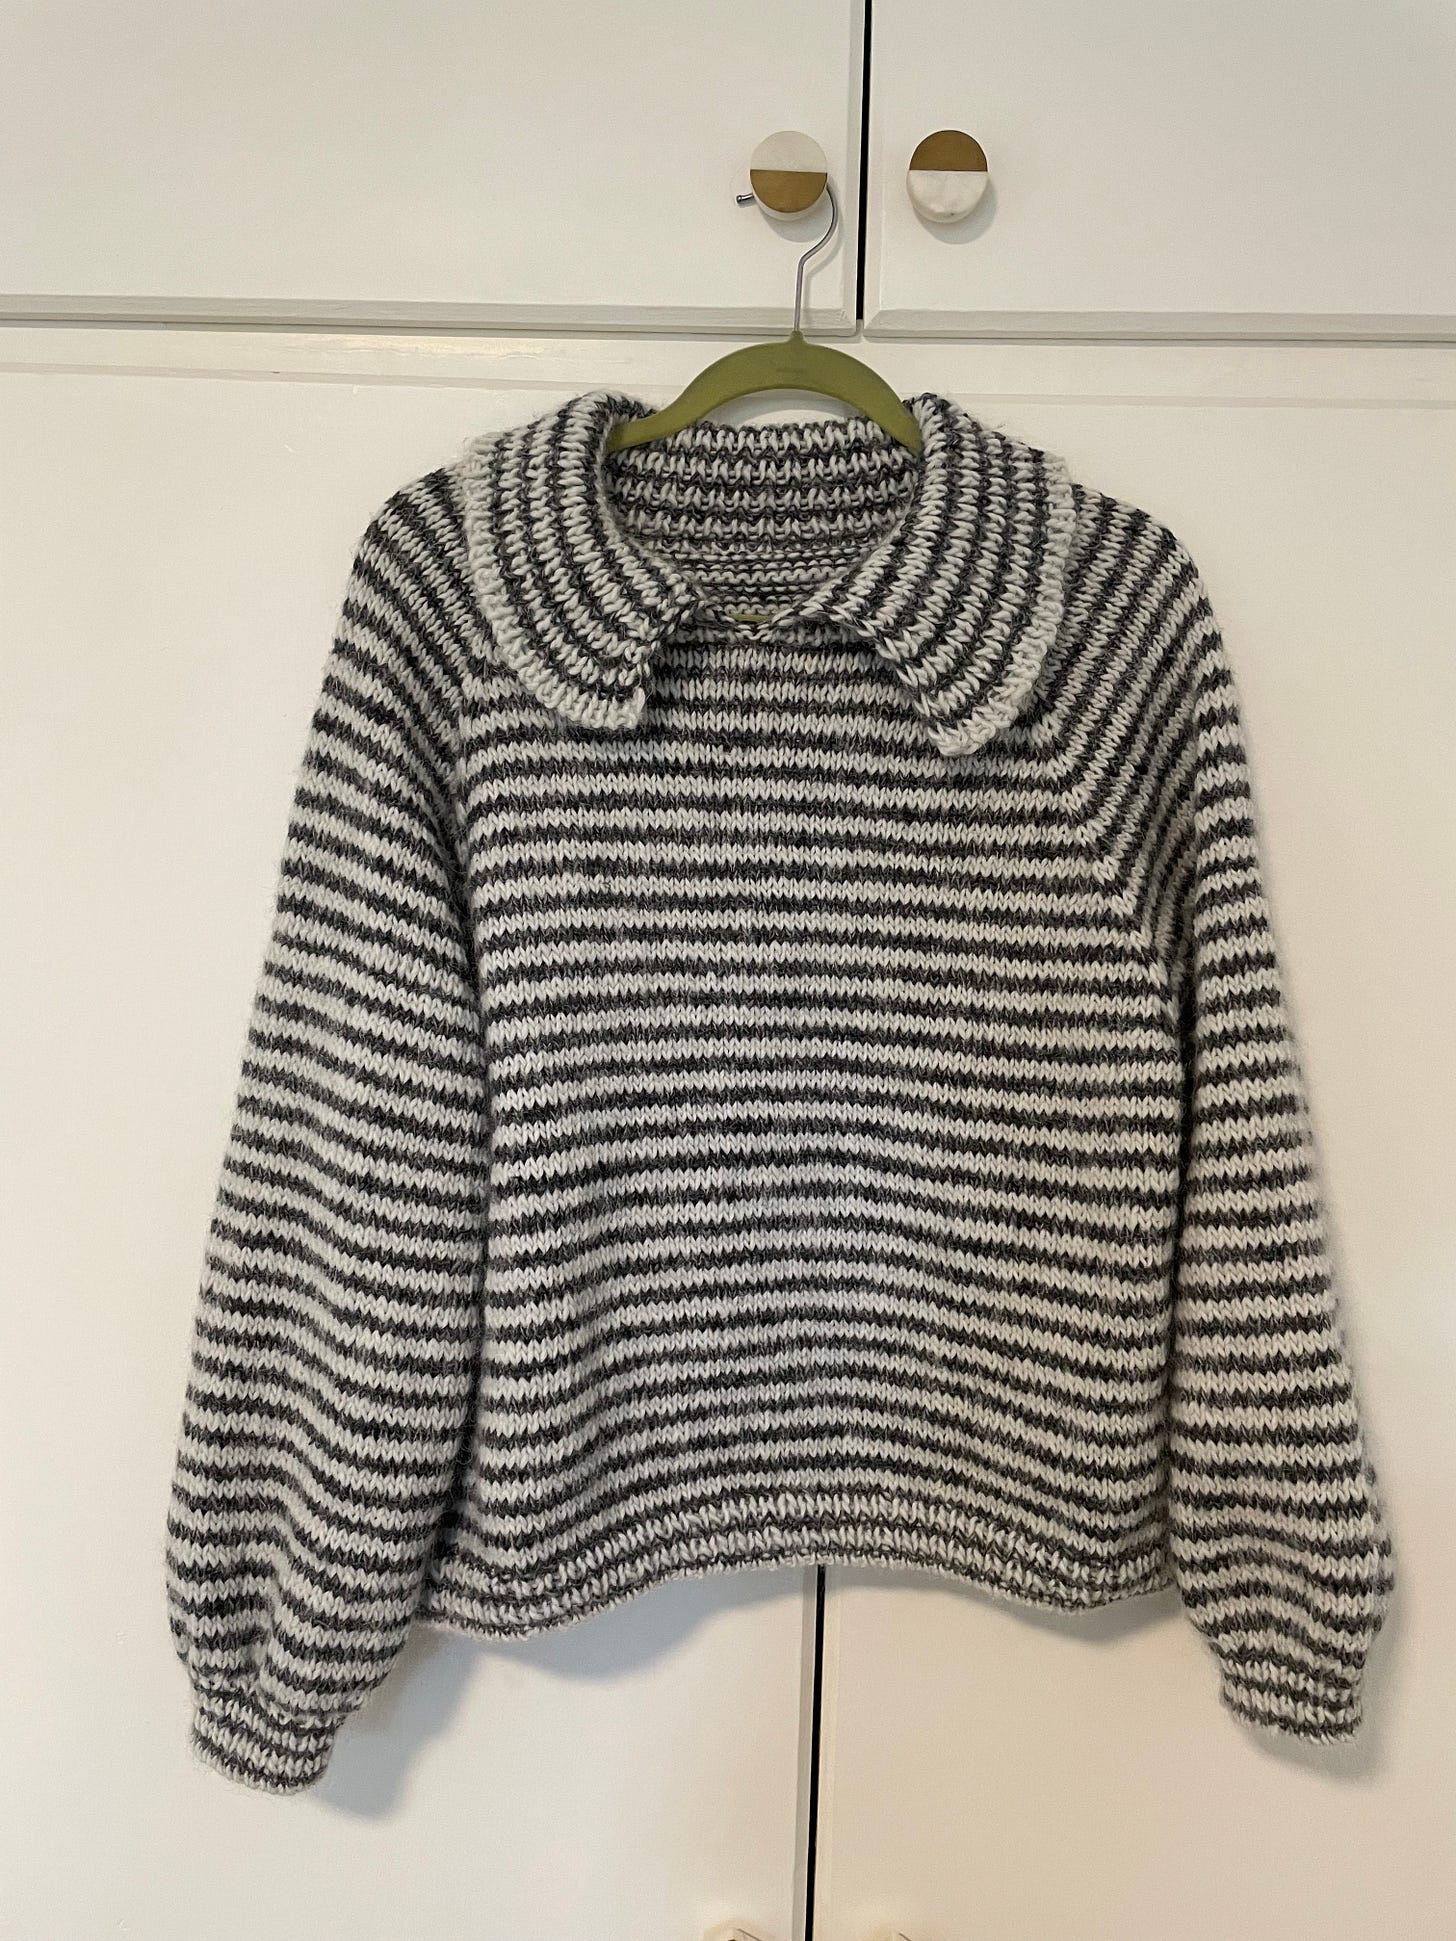 Handknit striped sweater hanging from hook.